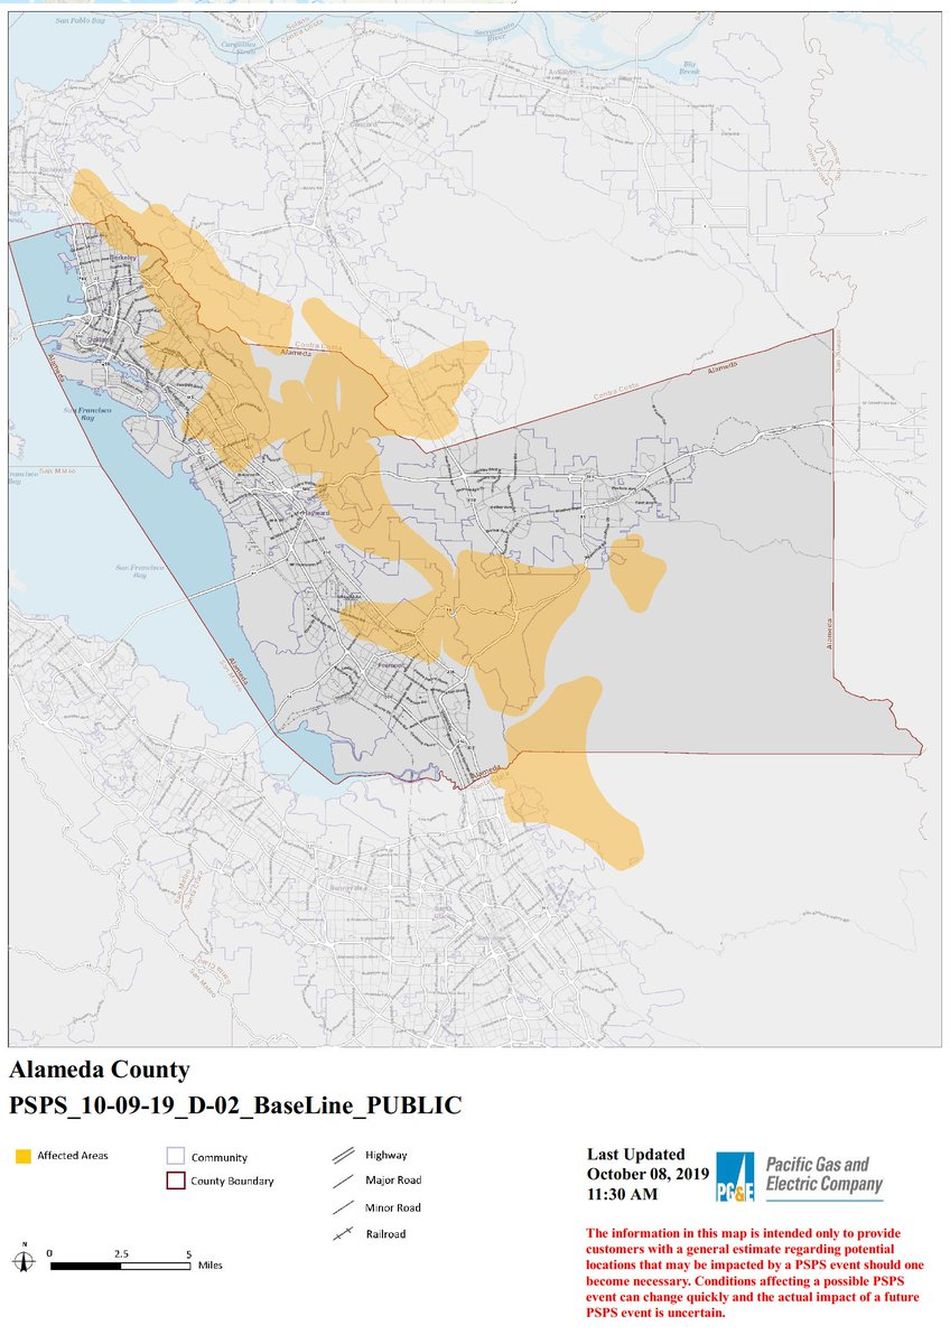 Easy to tell where your house is in this map of planned Berkeley and Oakland outages, right?